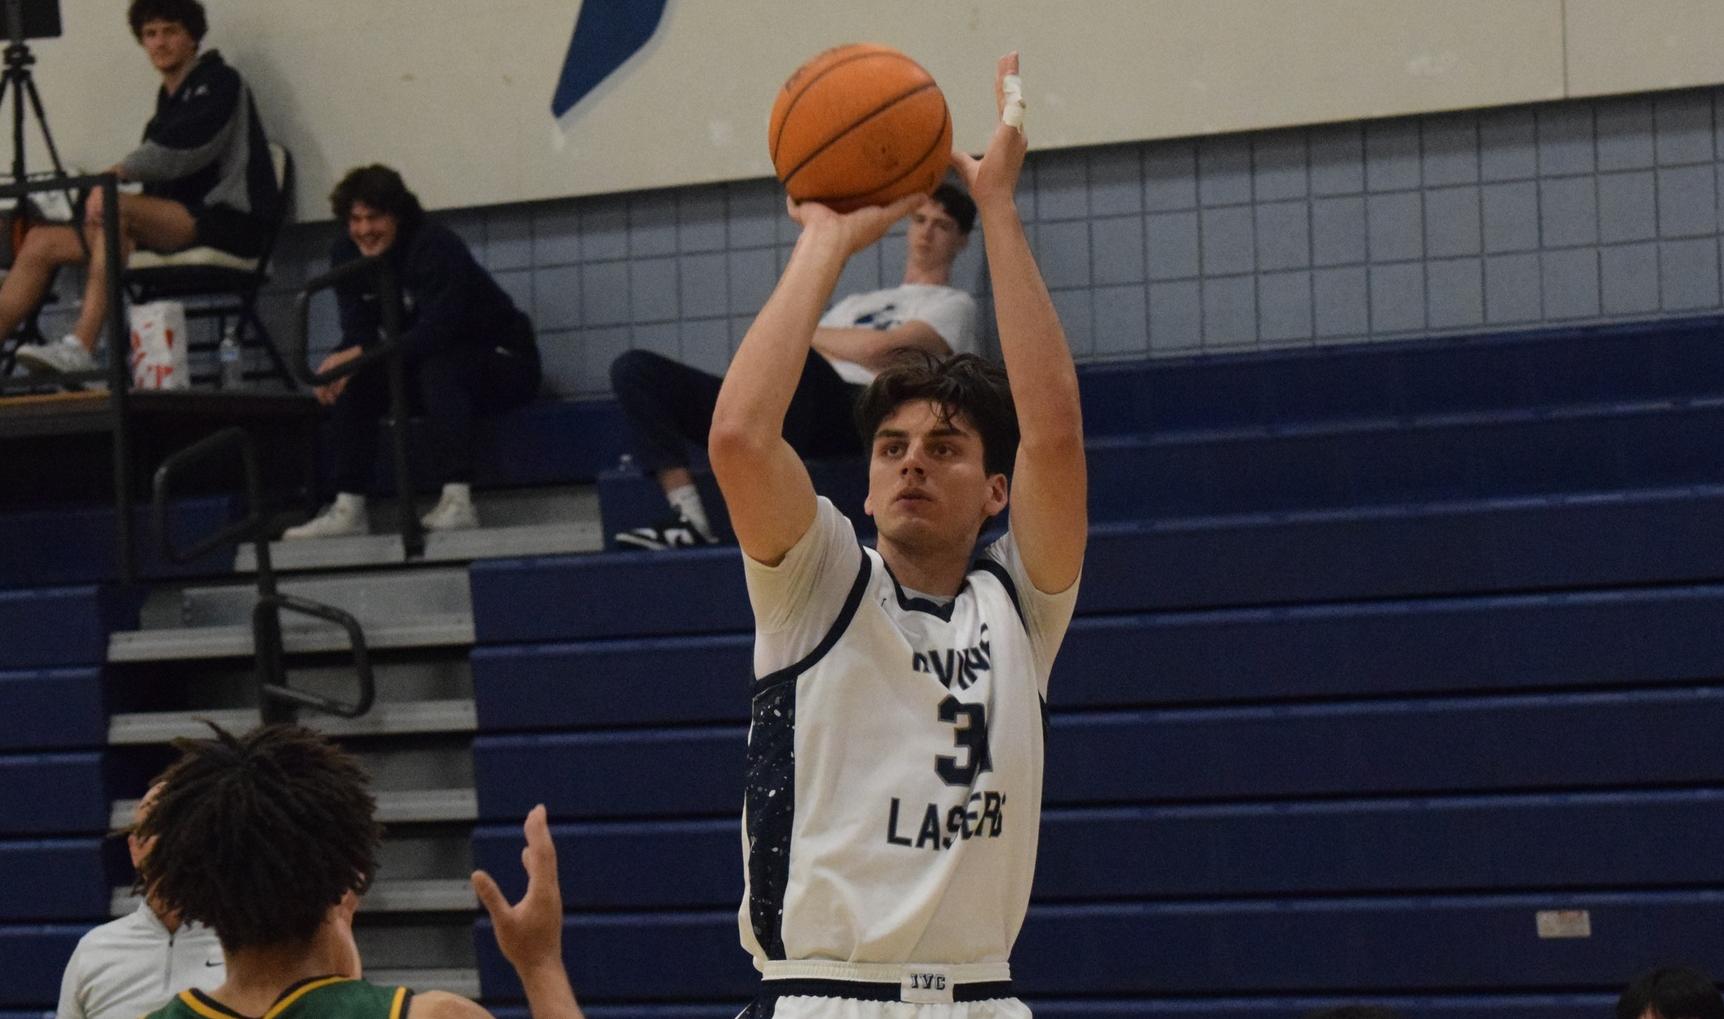 Men's basketball team rolls in win over LA Valley at home